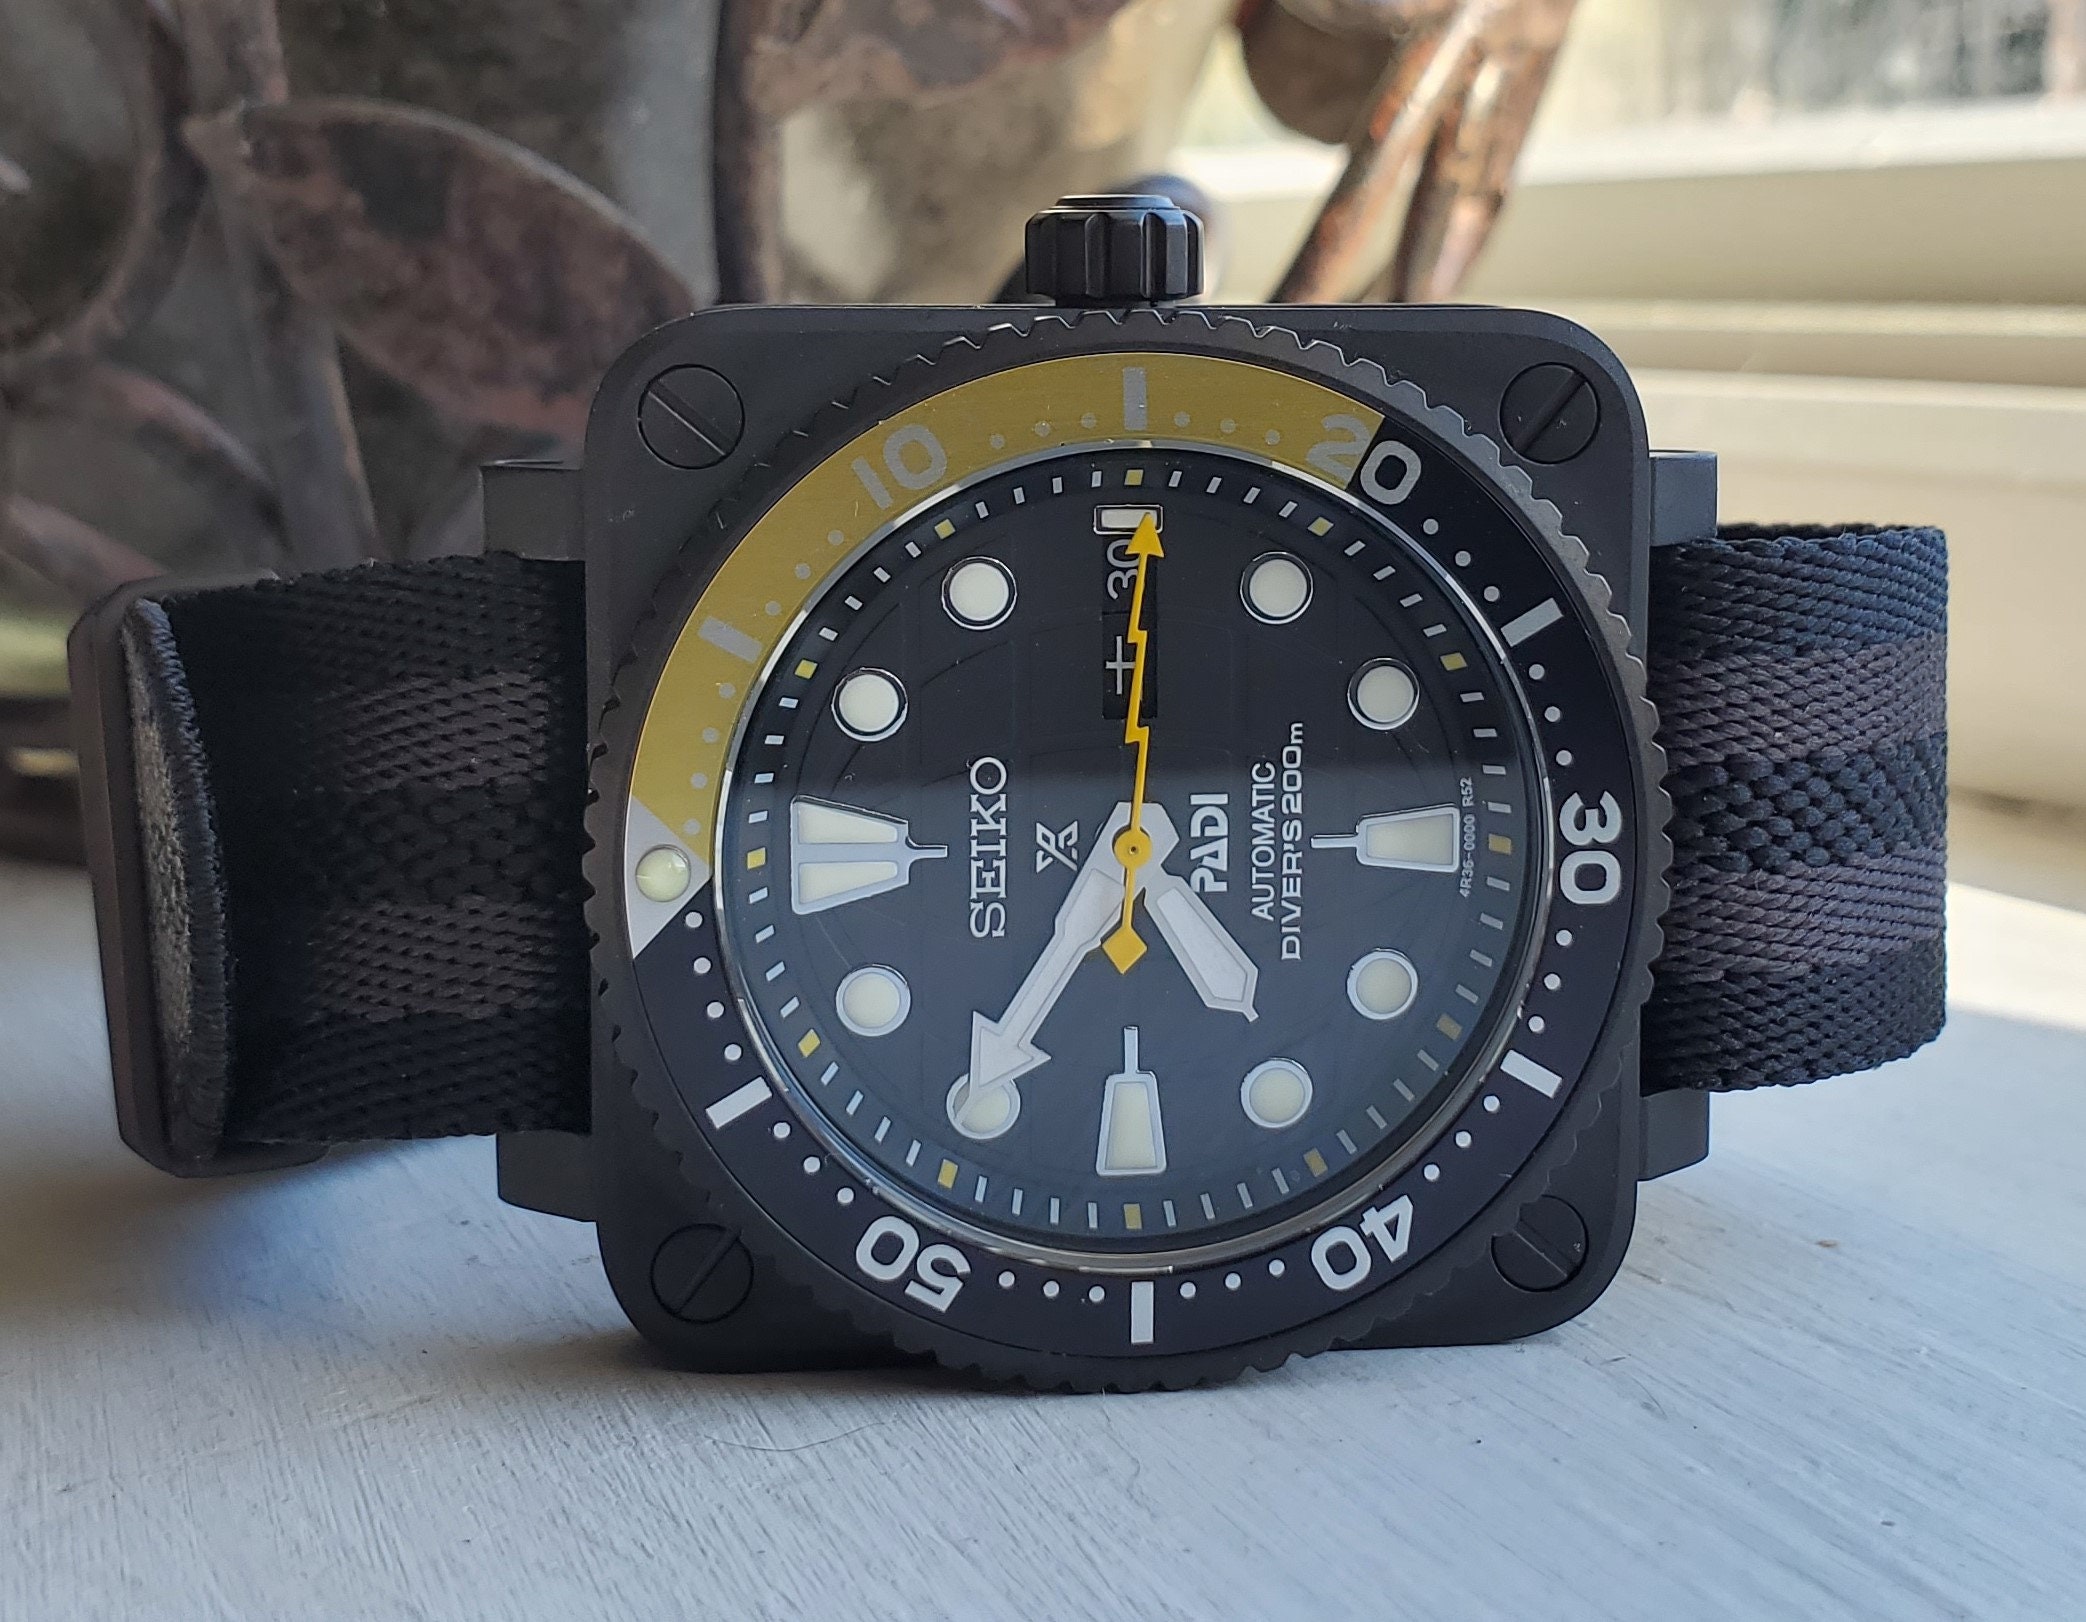 Bumblebee Bell & Ross Homage Custom Automatic Watch Seiko - Etsy New Zealand